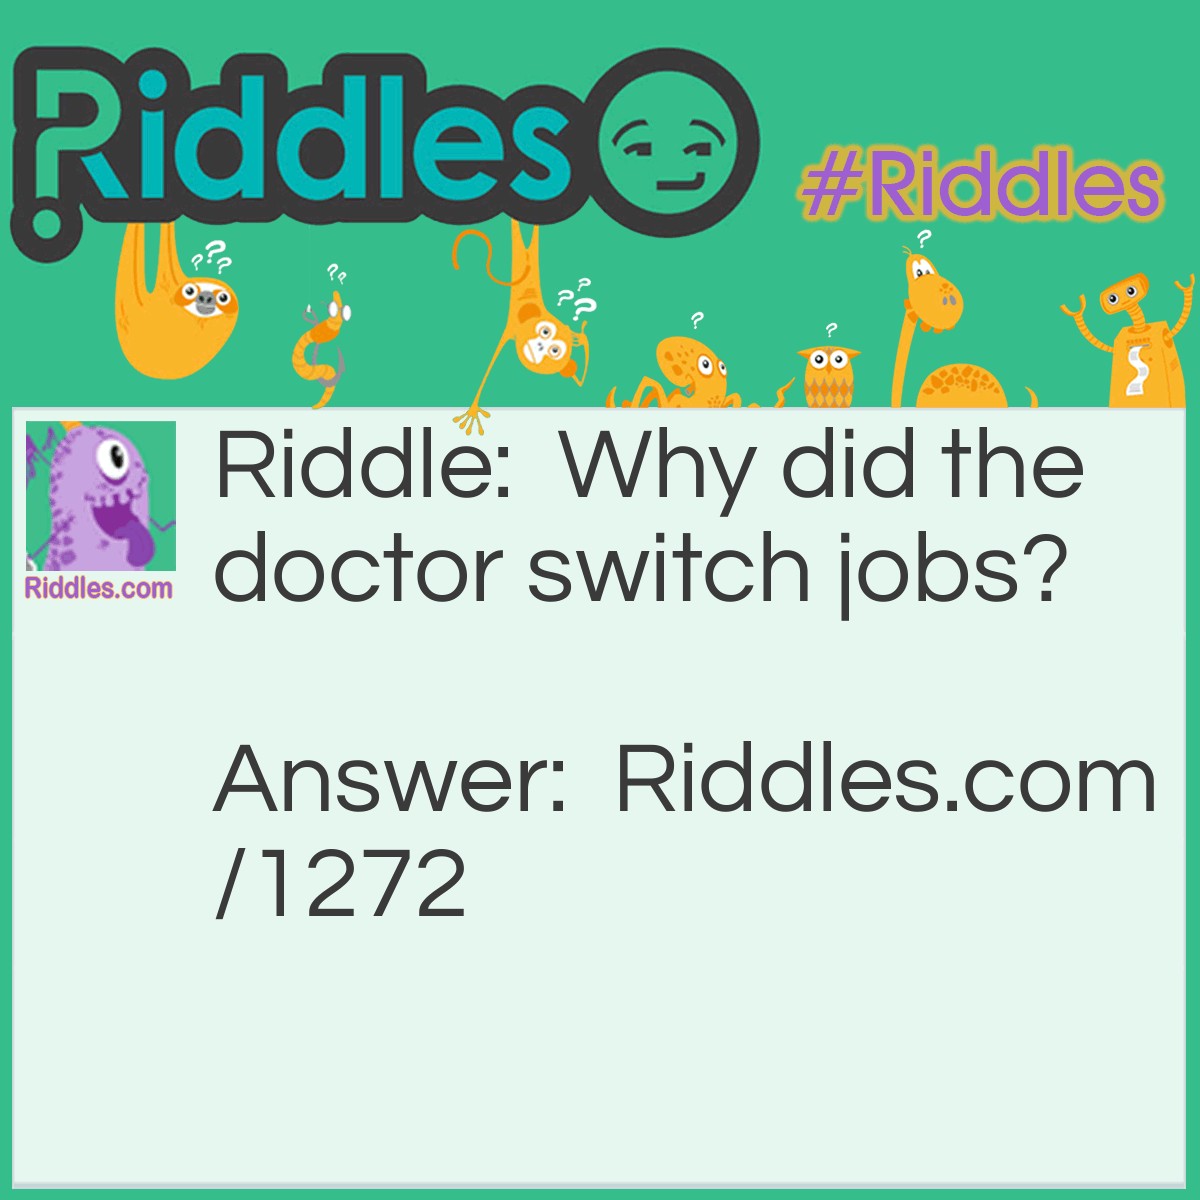 Riddle: Why did the doctor switch jobs? Answer: He lost his patients